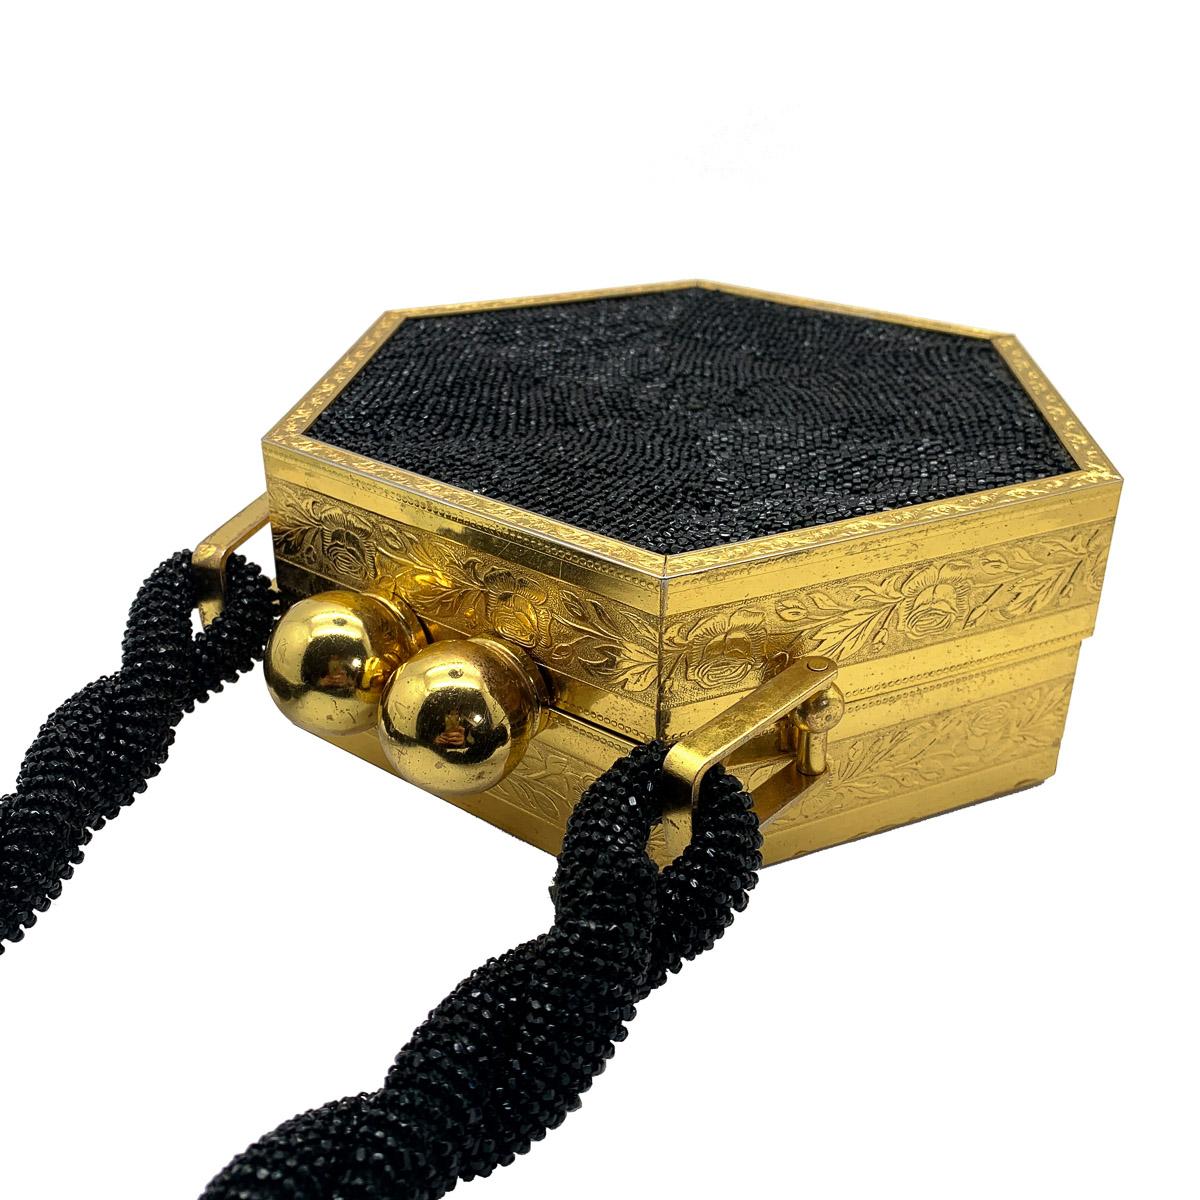 A stunning Vintage Gold & Black Minaudiere from the 1950s. In immaculate vintage condition inside and out. Featuring a large hexagonal box style bag with ornately chased sides and a wonderful black glass microbead front, back and handle. Finished to